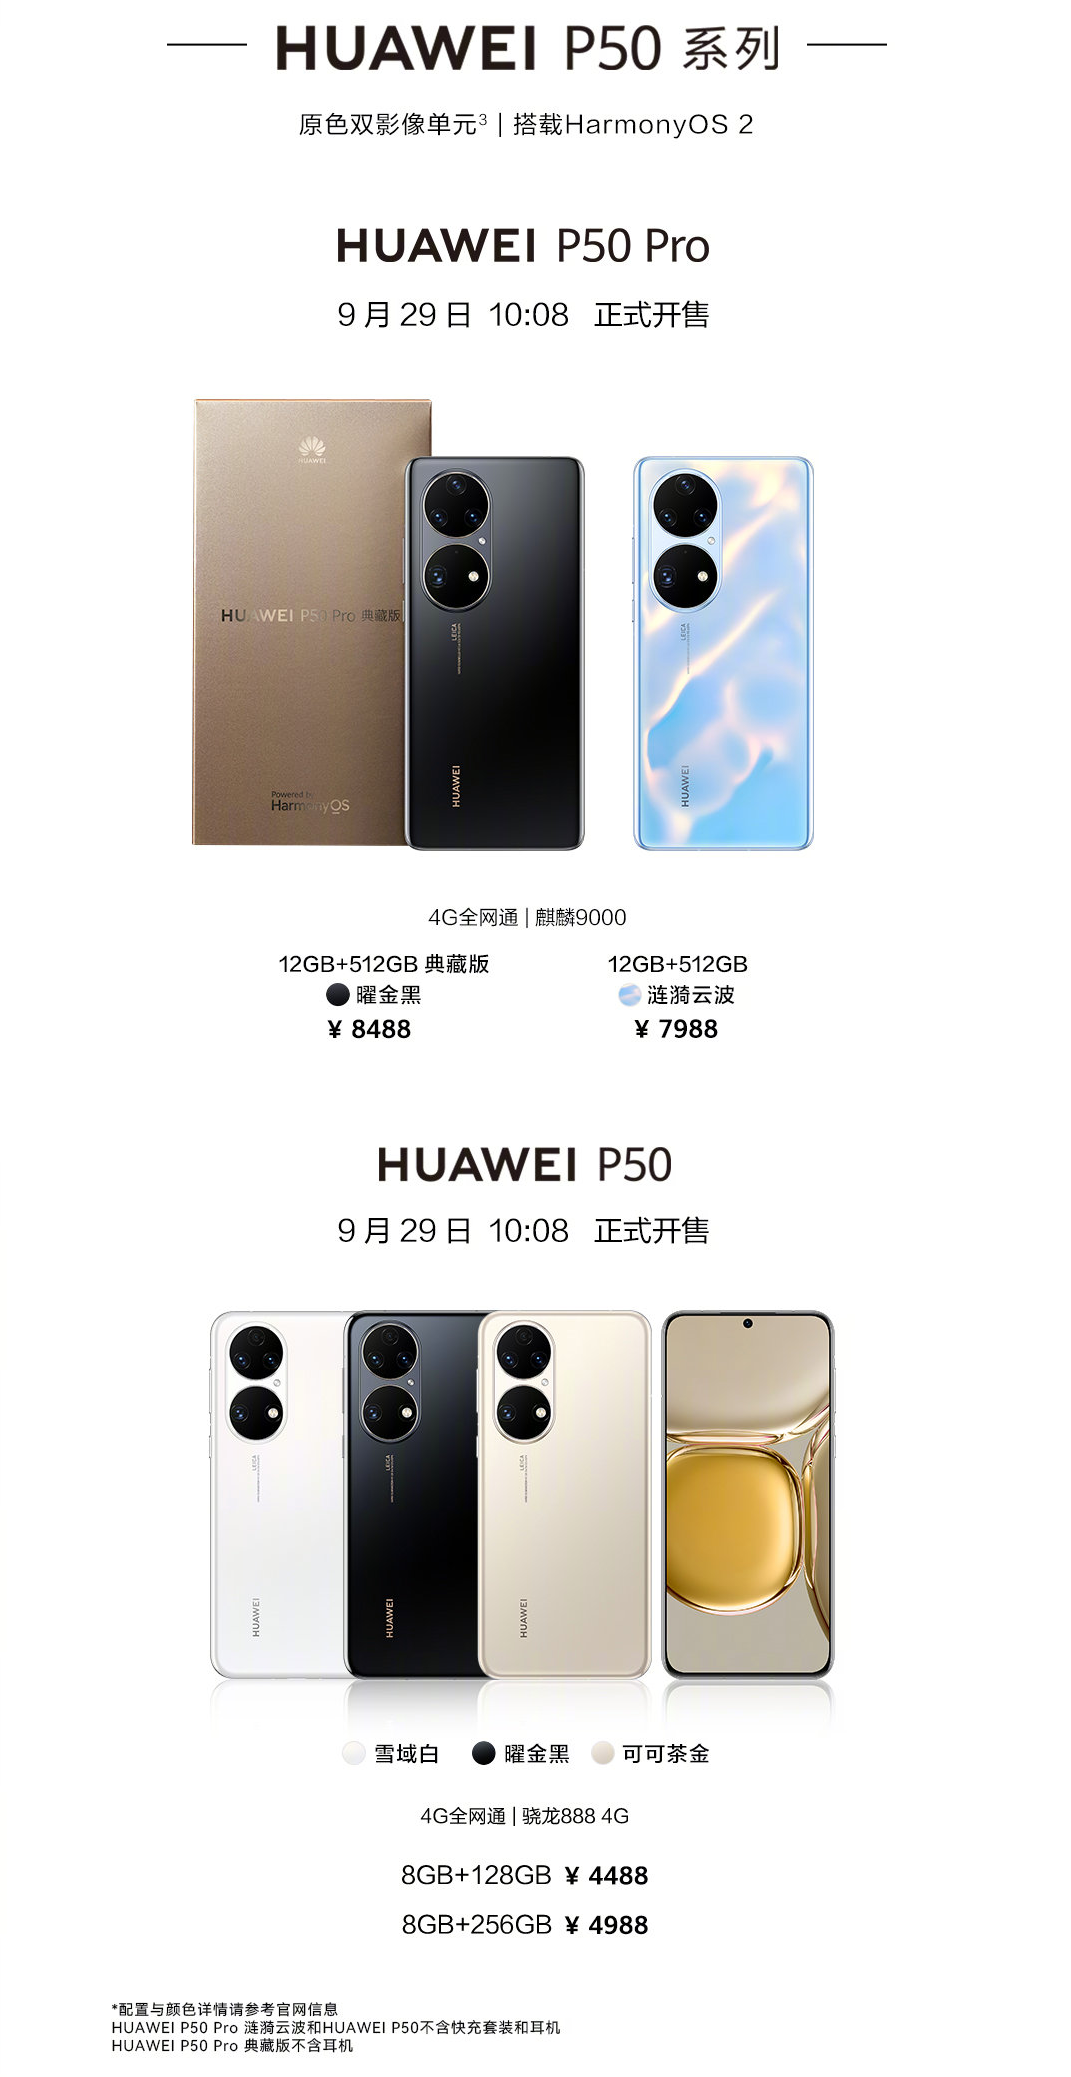 Huawei P50 and P50 Pro 4G sale